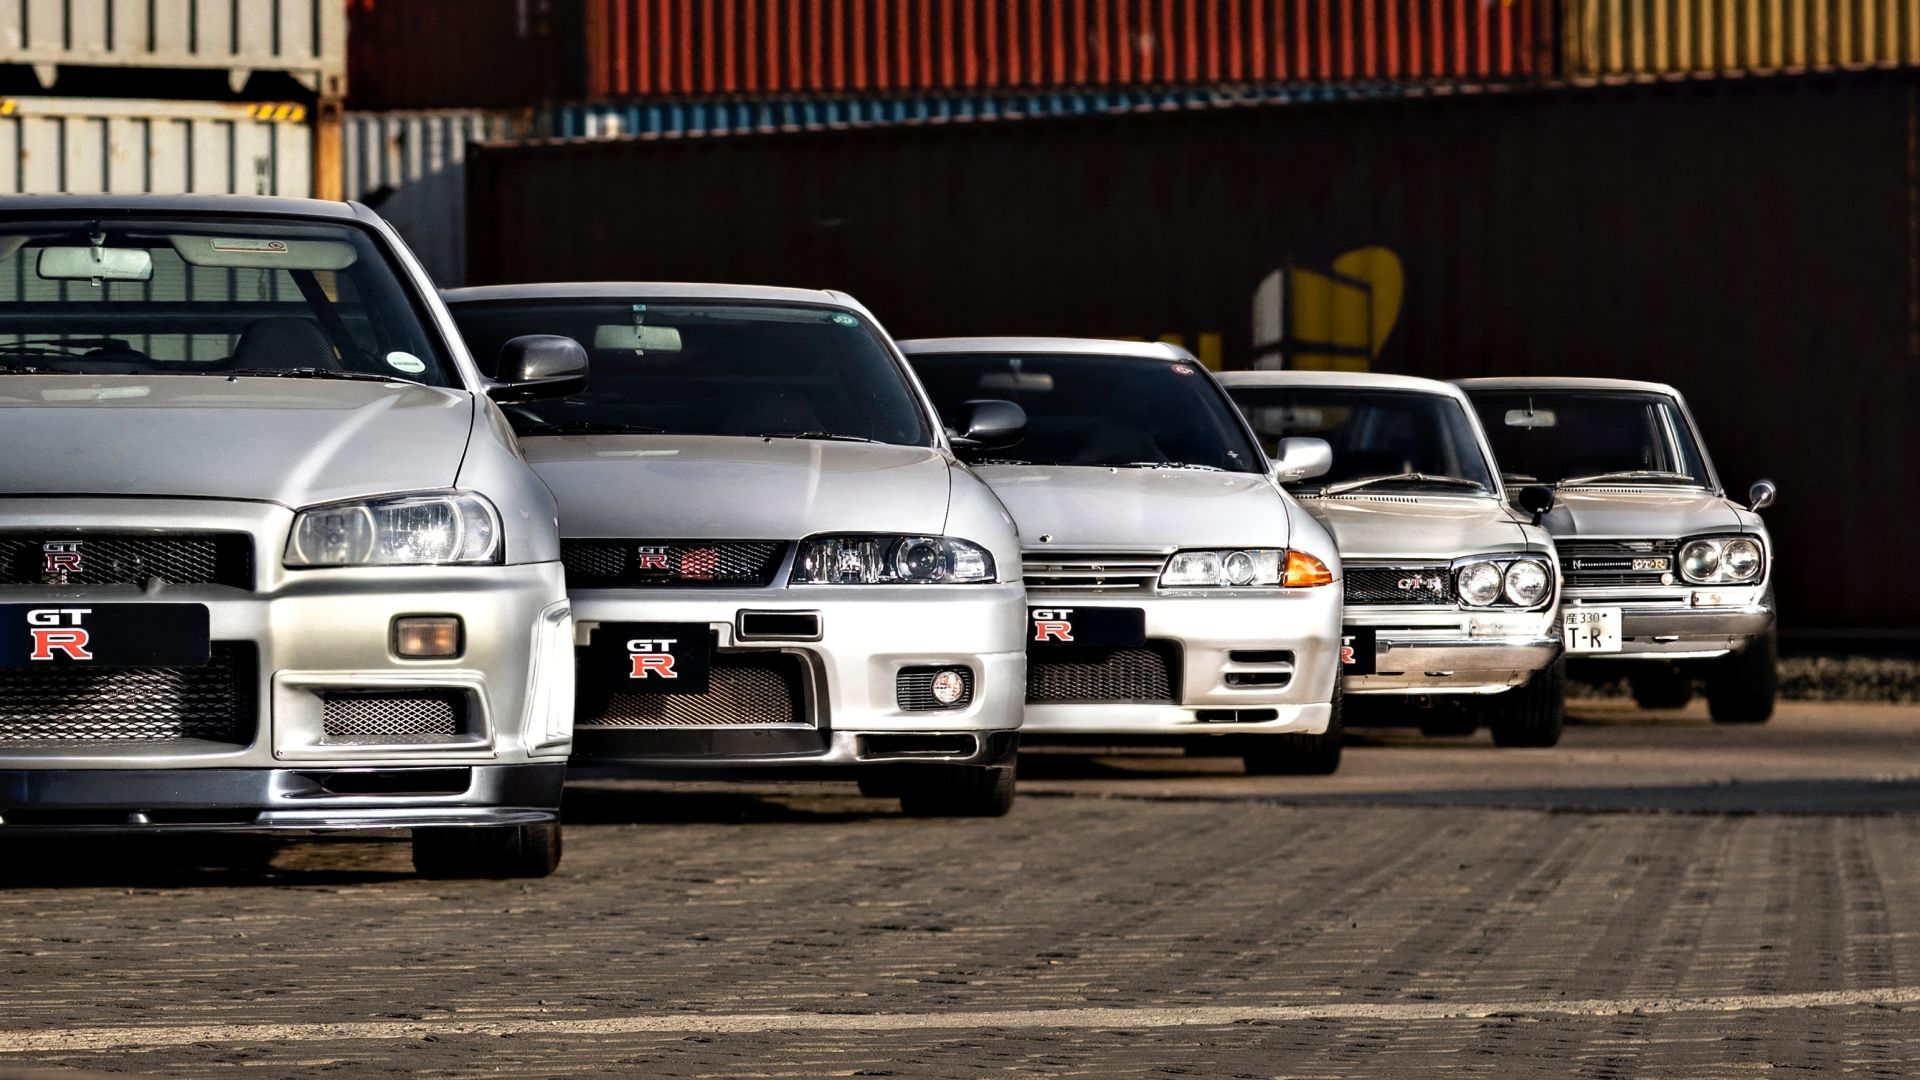 The Best Nissan Skyline Models, Ranked By 0-60 Times